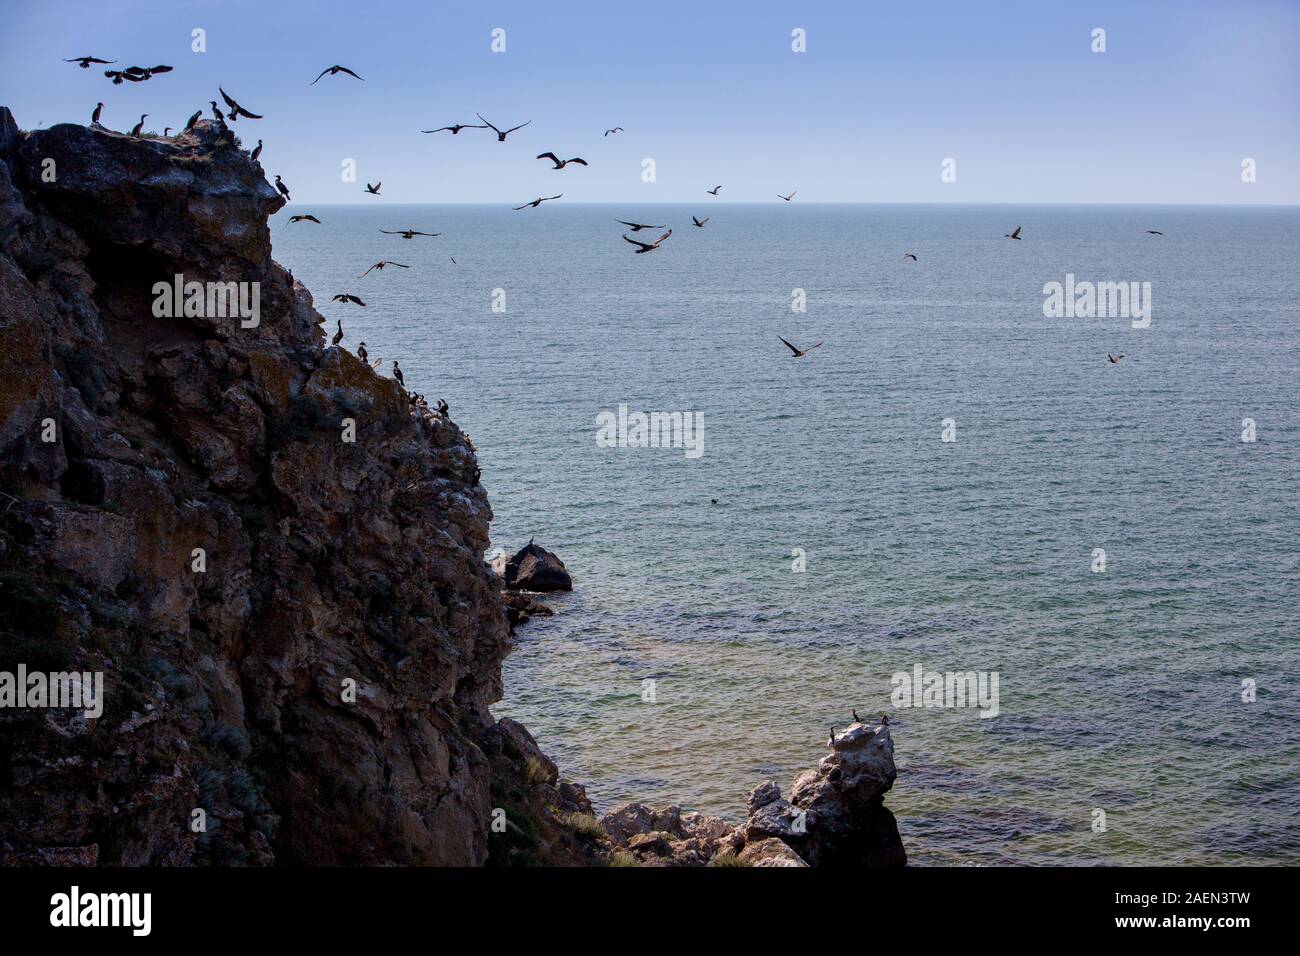 Birds on the rock in sea, seagulls and cormorants sitting and flying. Sea birds in natural habitat. Stock Photo